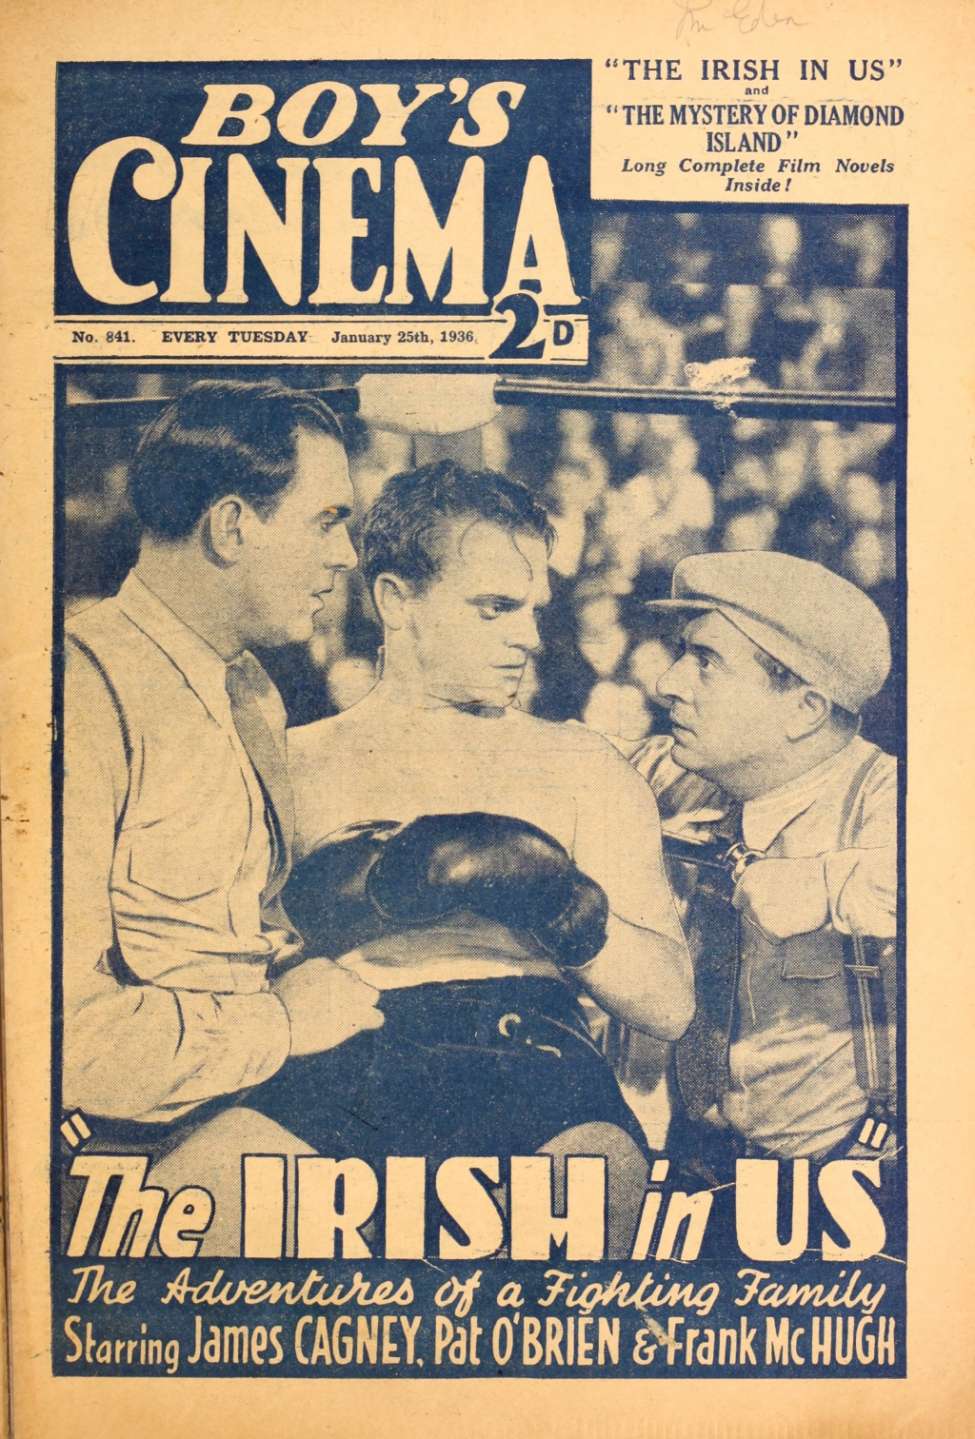 Comic Book Cover For Boy's Cinema 841 - The Irish in Us - James Cagney